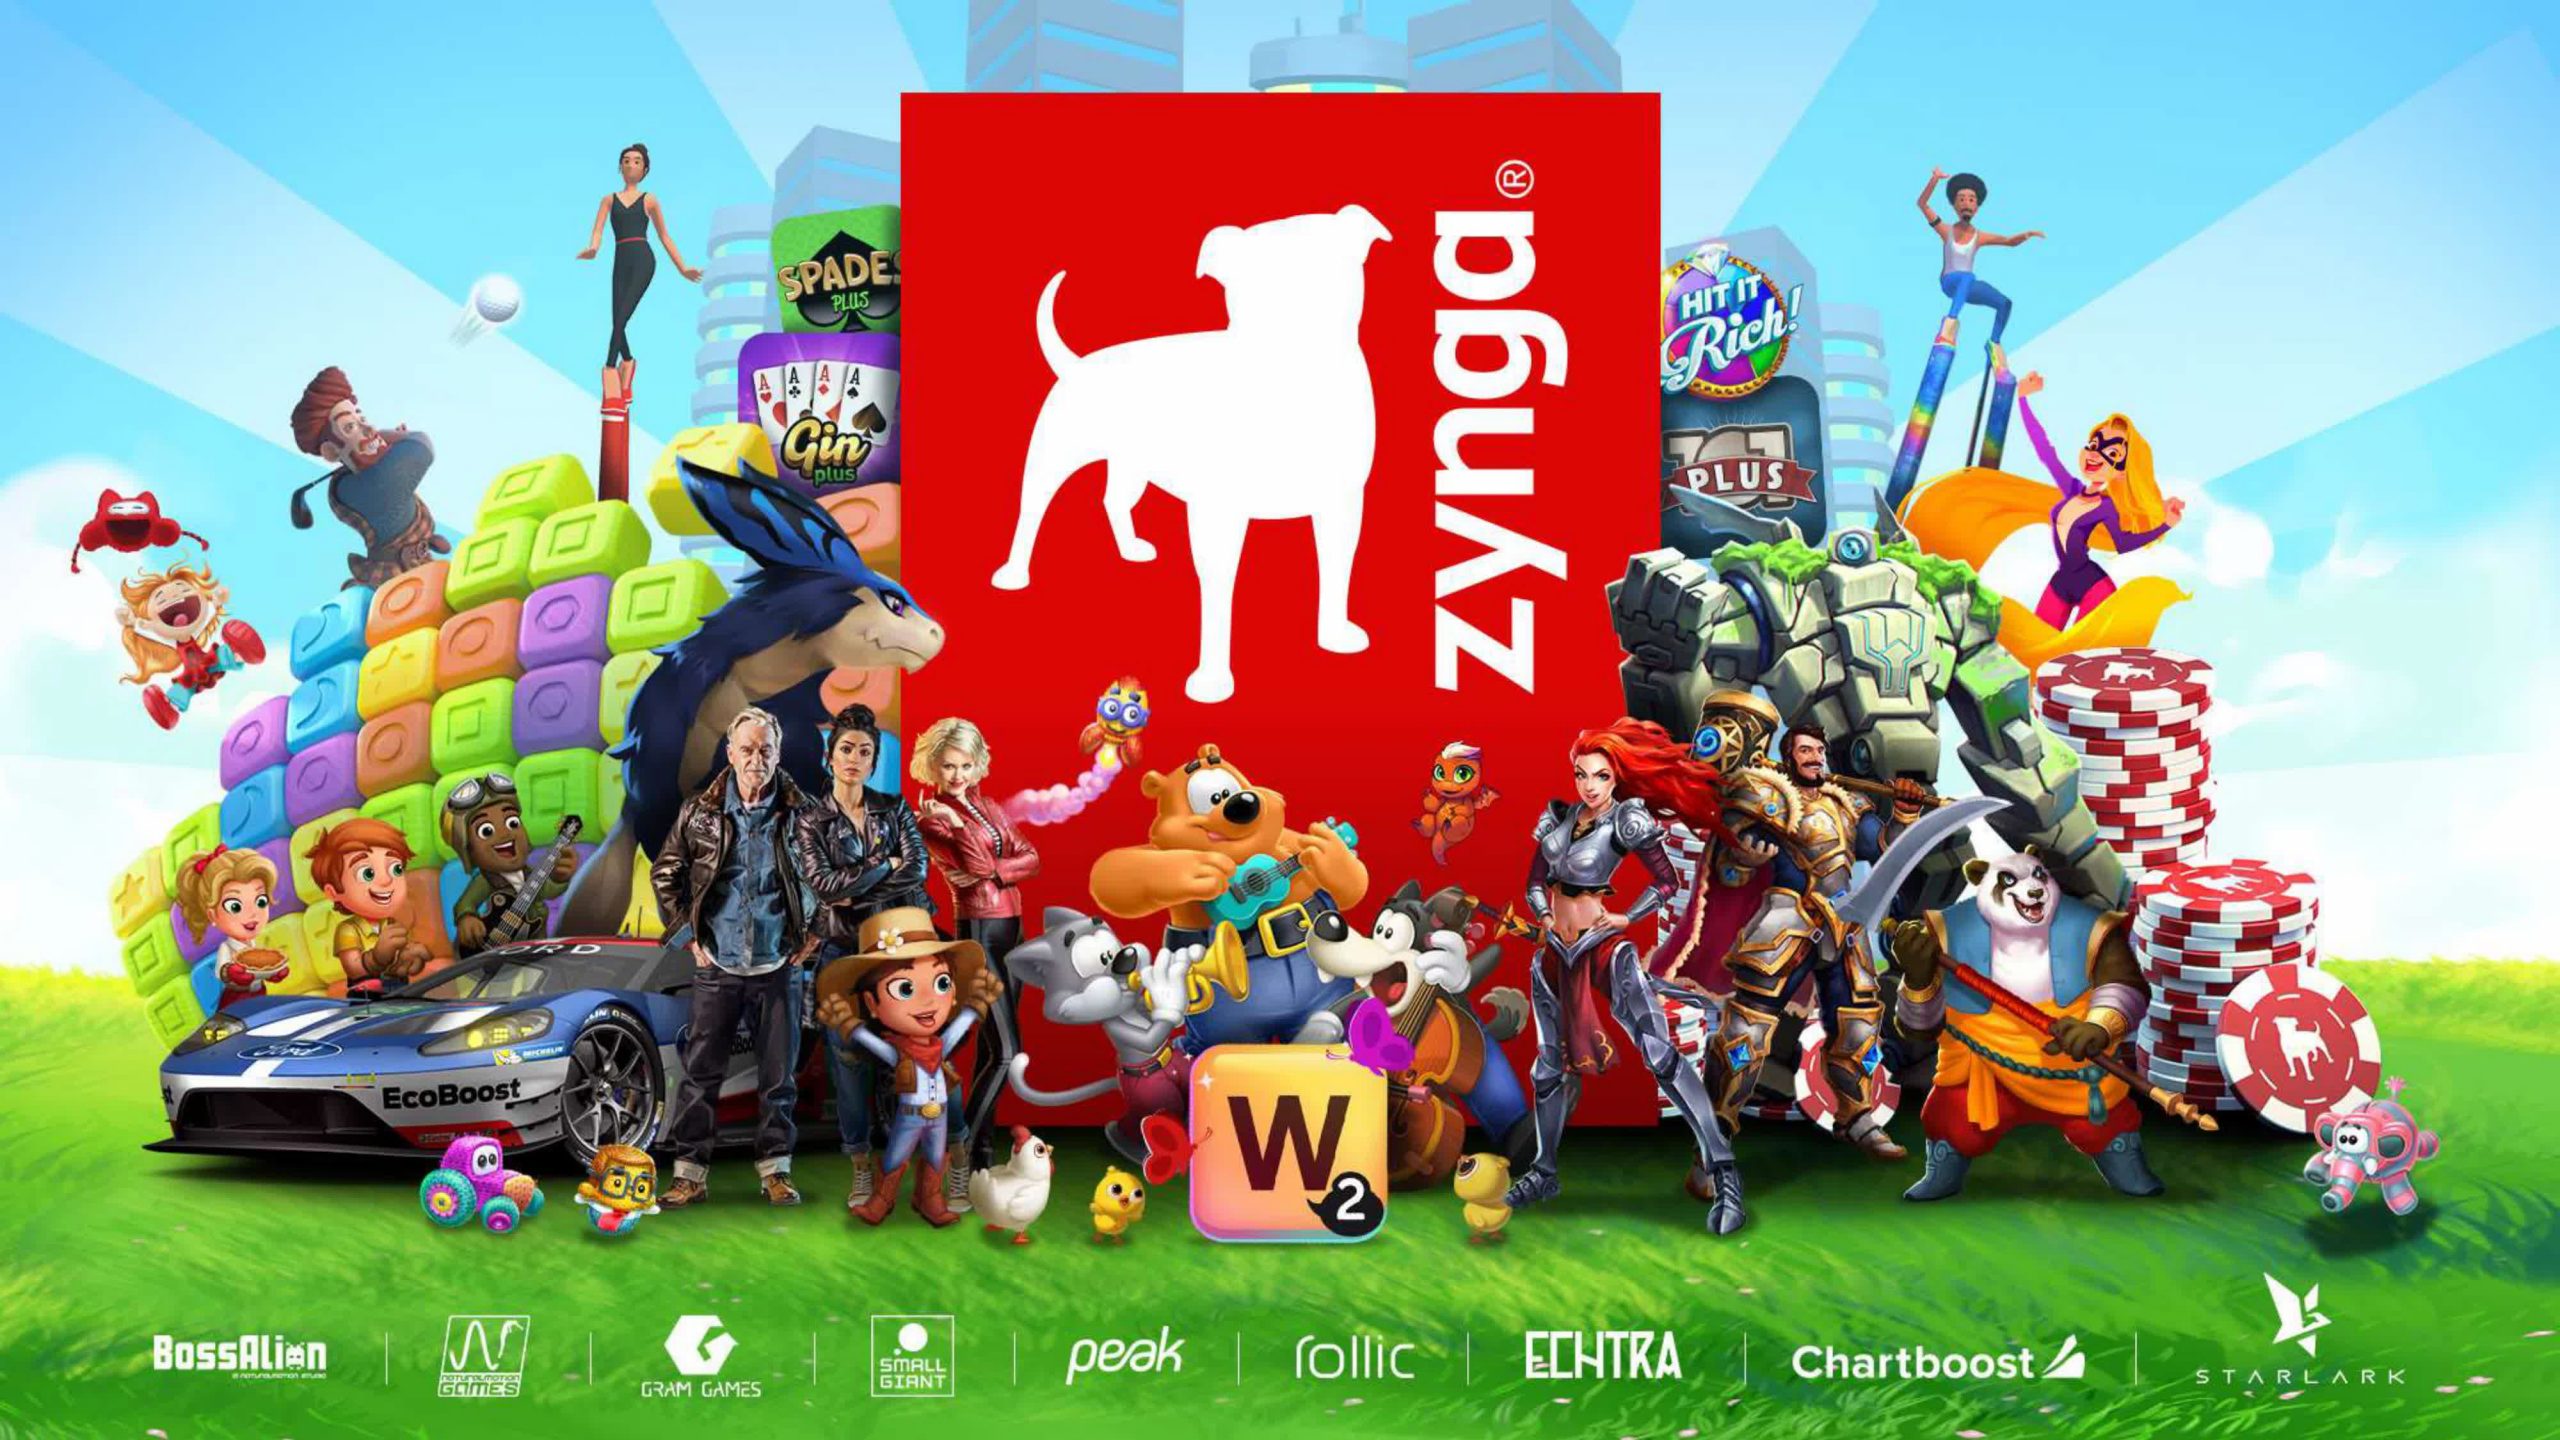 Take-Two Acquires Zynga for $12.7 Billion